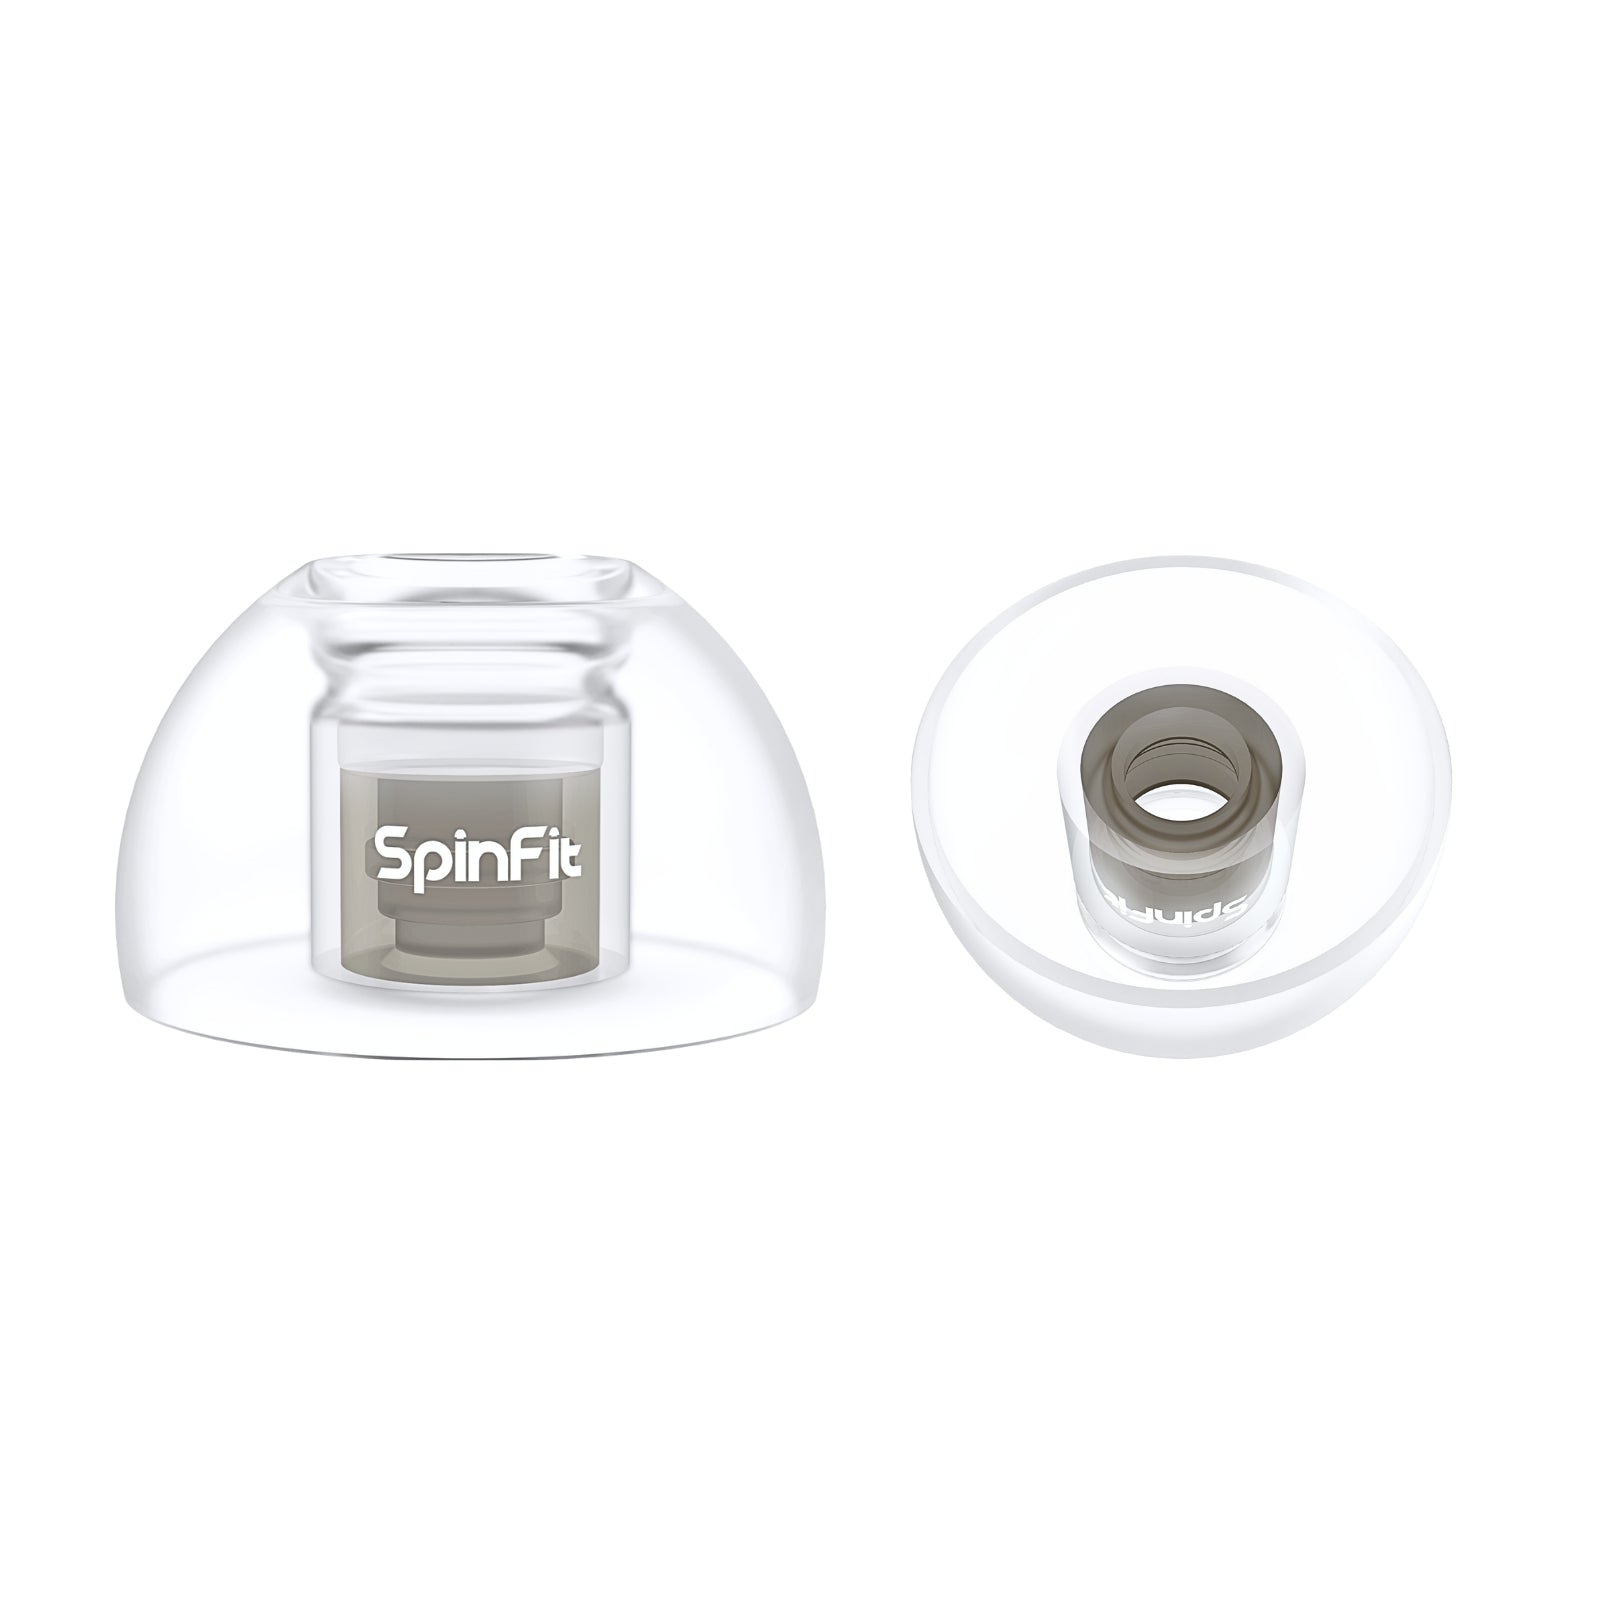 SpinFit Omni Silicone Eartips For IEM & True Wireless Earbuds